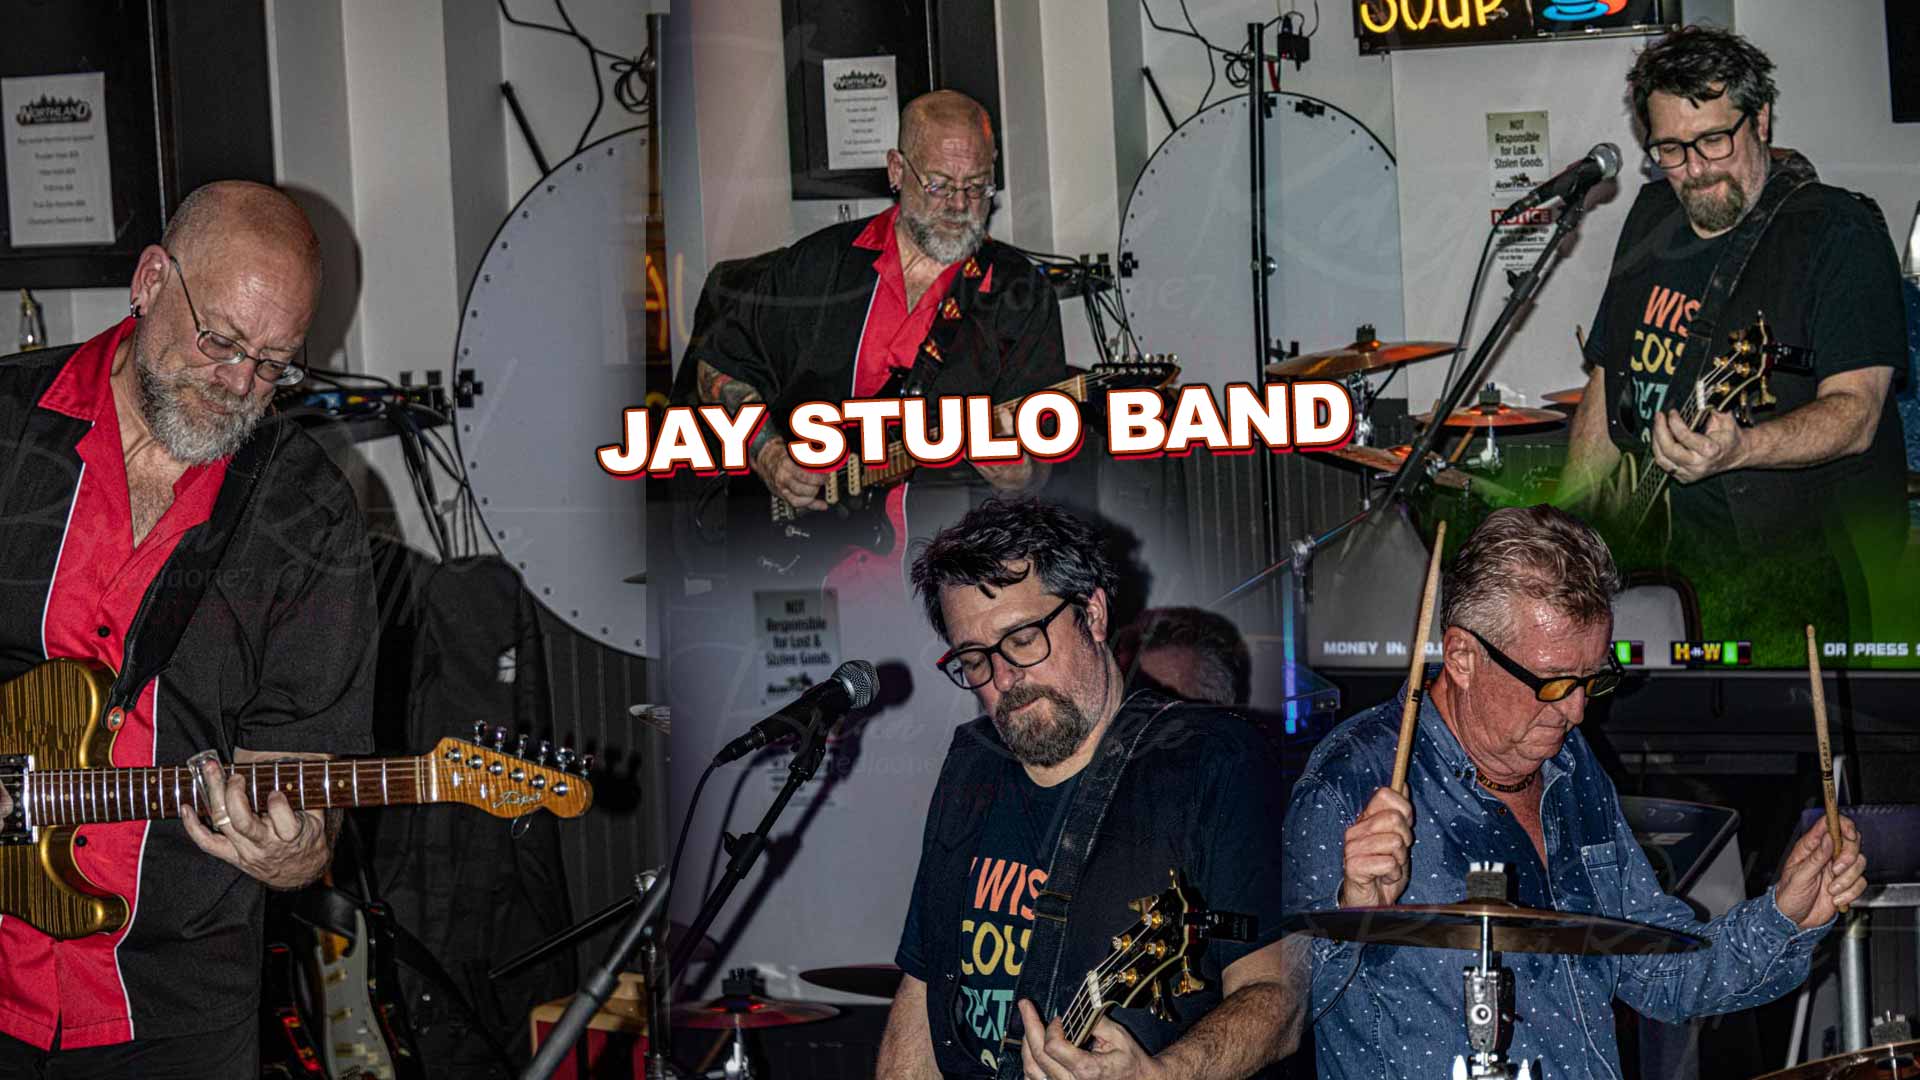 Jay Stulo Band brings the Blues to Northland Sports Bar and Gril in Appleton Wisconsin